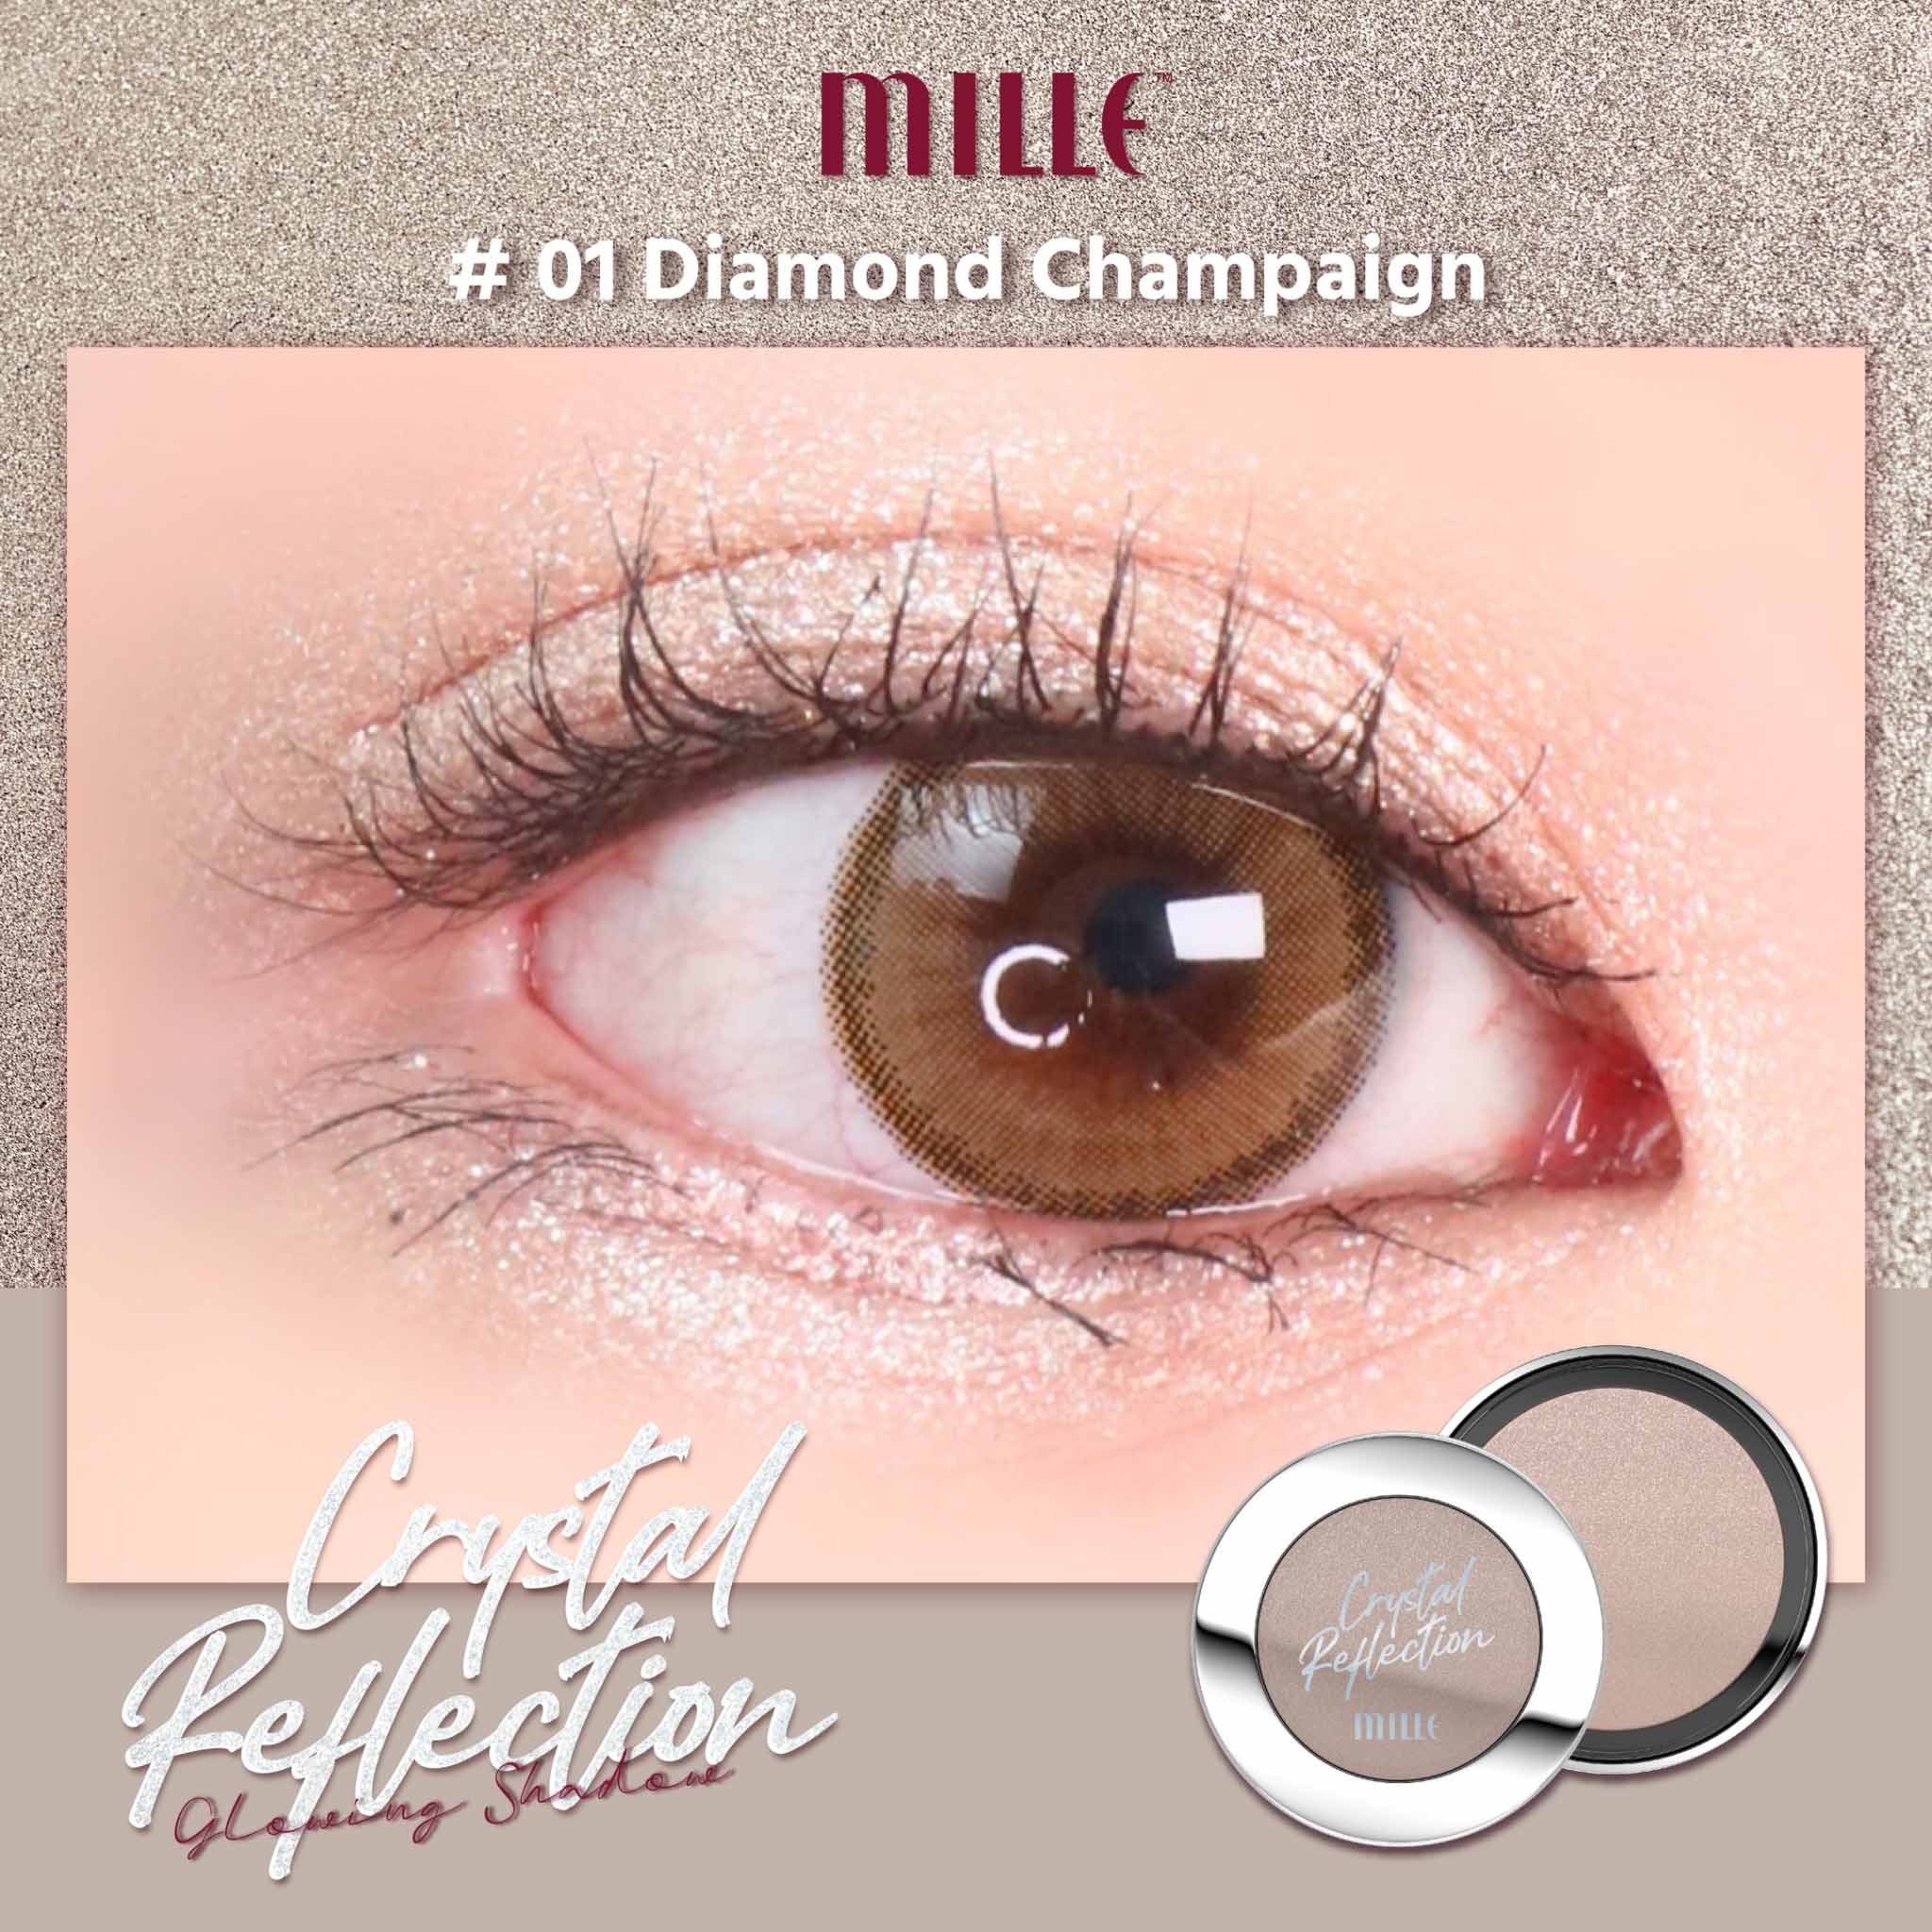 Mille, Mille รีวิว, Mille ราคา, Mille Crystal Reflection Glowing Shadow, Mille Crystal Reflection Glowing Shadow รีวิว, Mille Crystal Reflection Glowing Shadow ราคา, Crystal Reflection Glowing Shadow, Mille Crystal Reflection Glowing Shadow 1.7g, Mille Crystal Reflection Glowing Shadow #04 Dusty Pink, คริสตัลชาโดว์, อายแชโดว์, อายแชโดว์ คือ, วิธีทาอายแชโดว์ เกาหลี